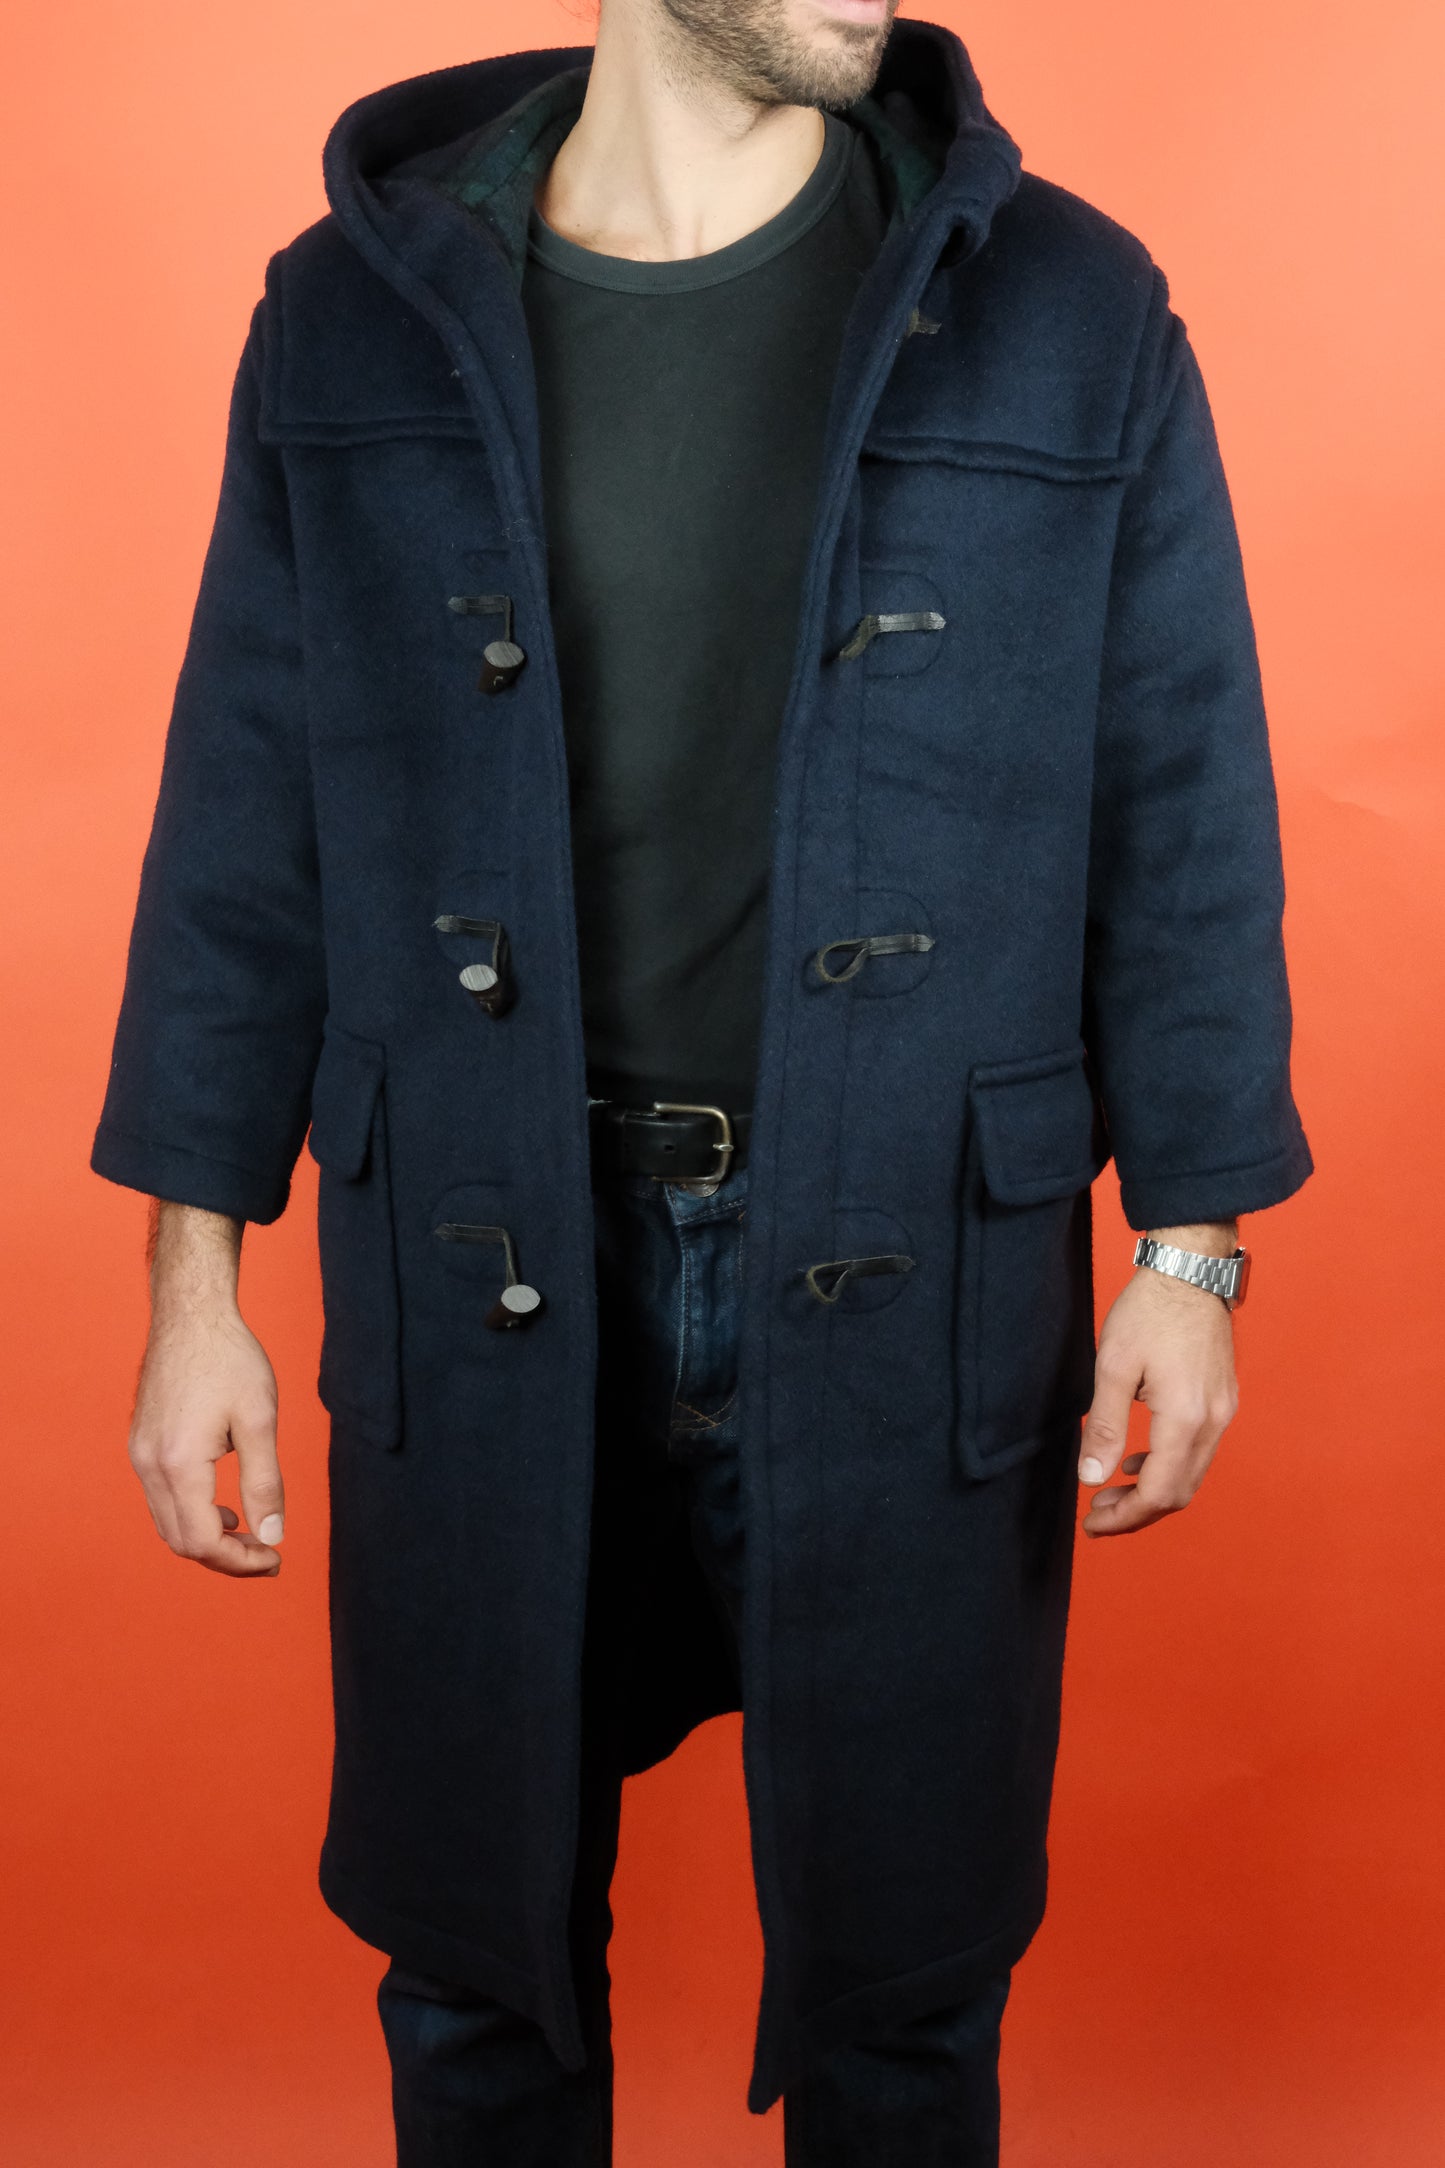 Gloverall Coat Made in England 'M' - vintage clothing clochard92.com